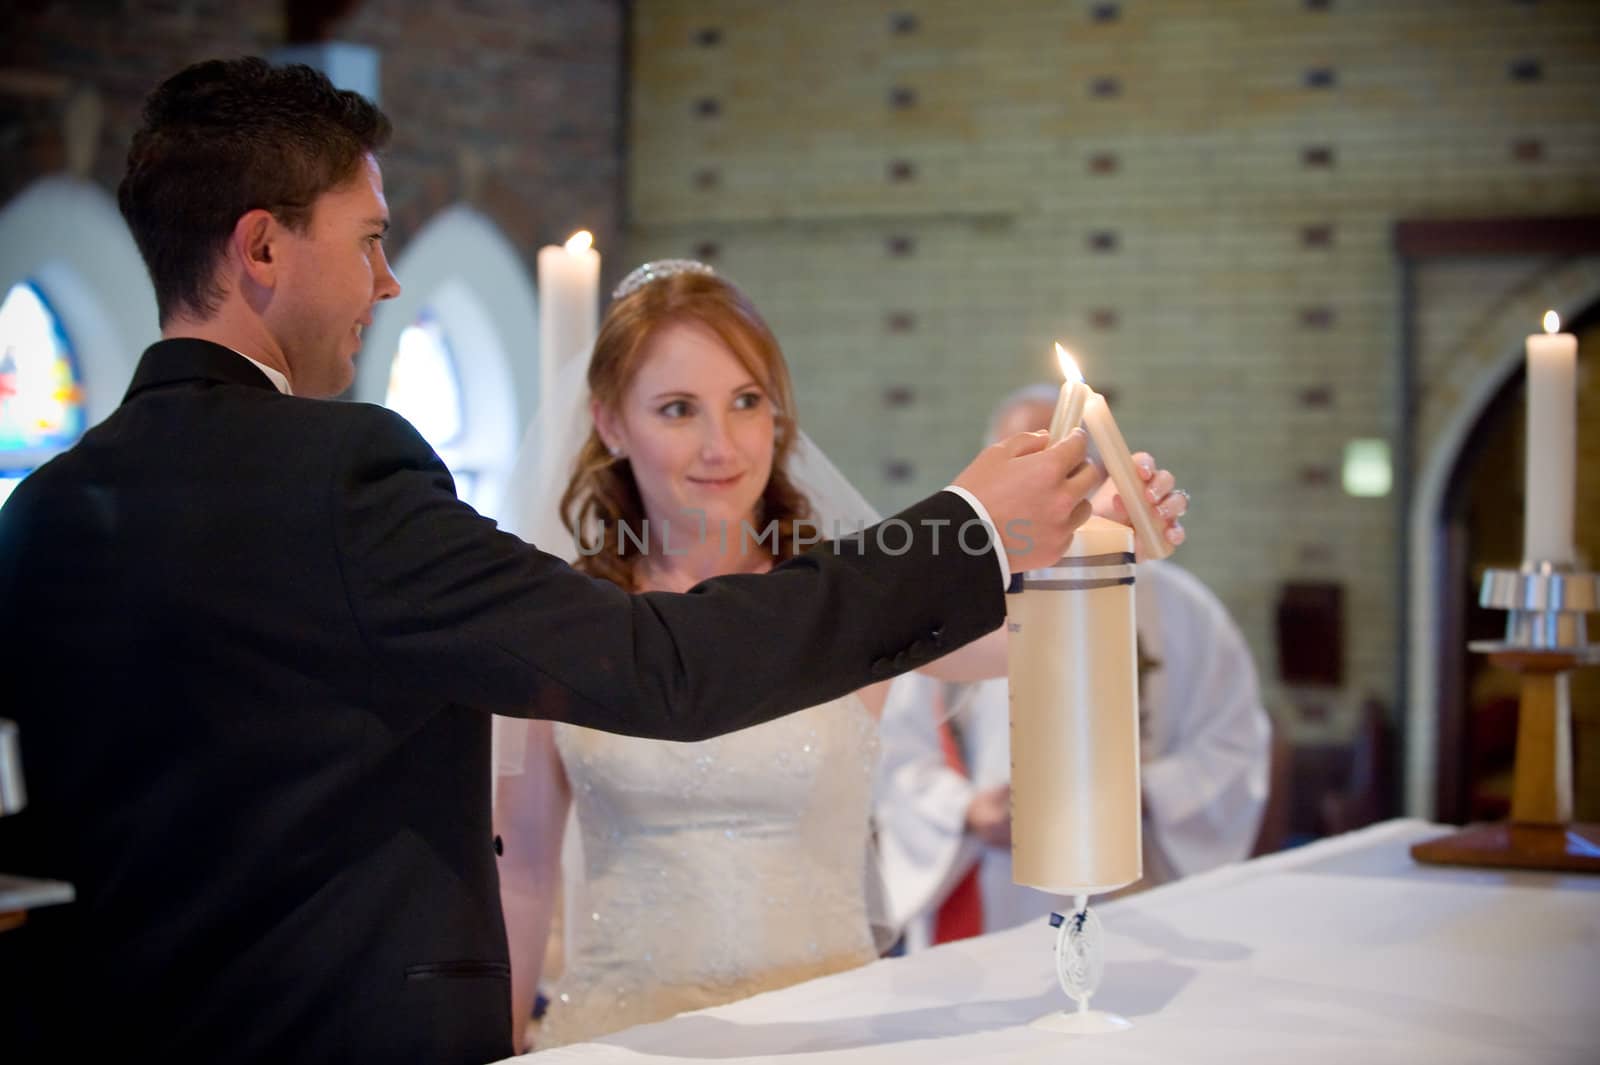 wedding couple lighting the main candle together with smaller candles by Ansunette